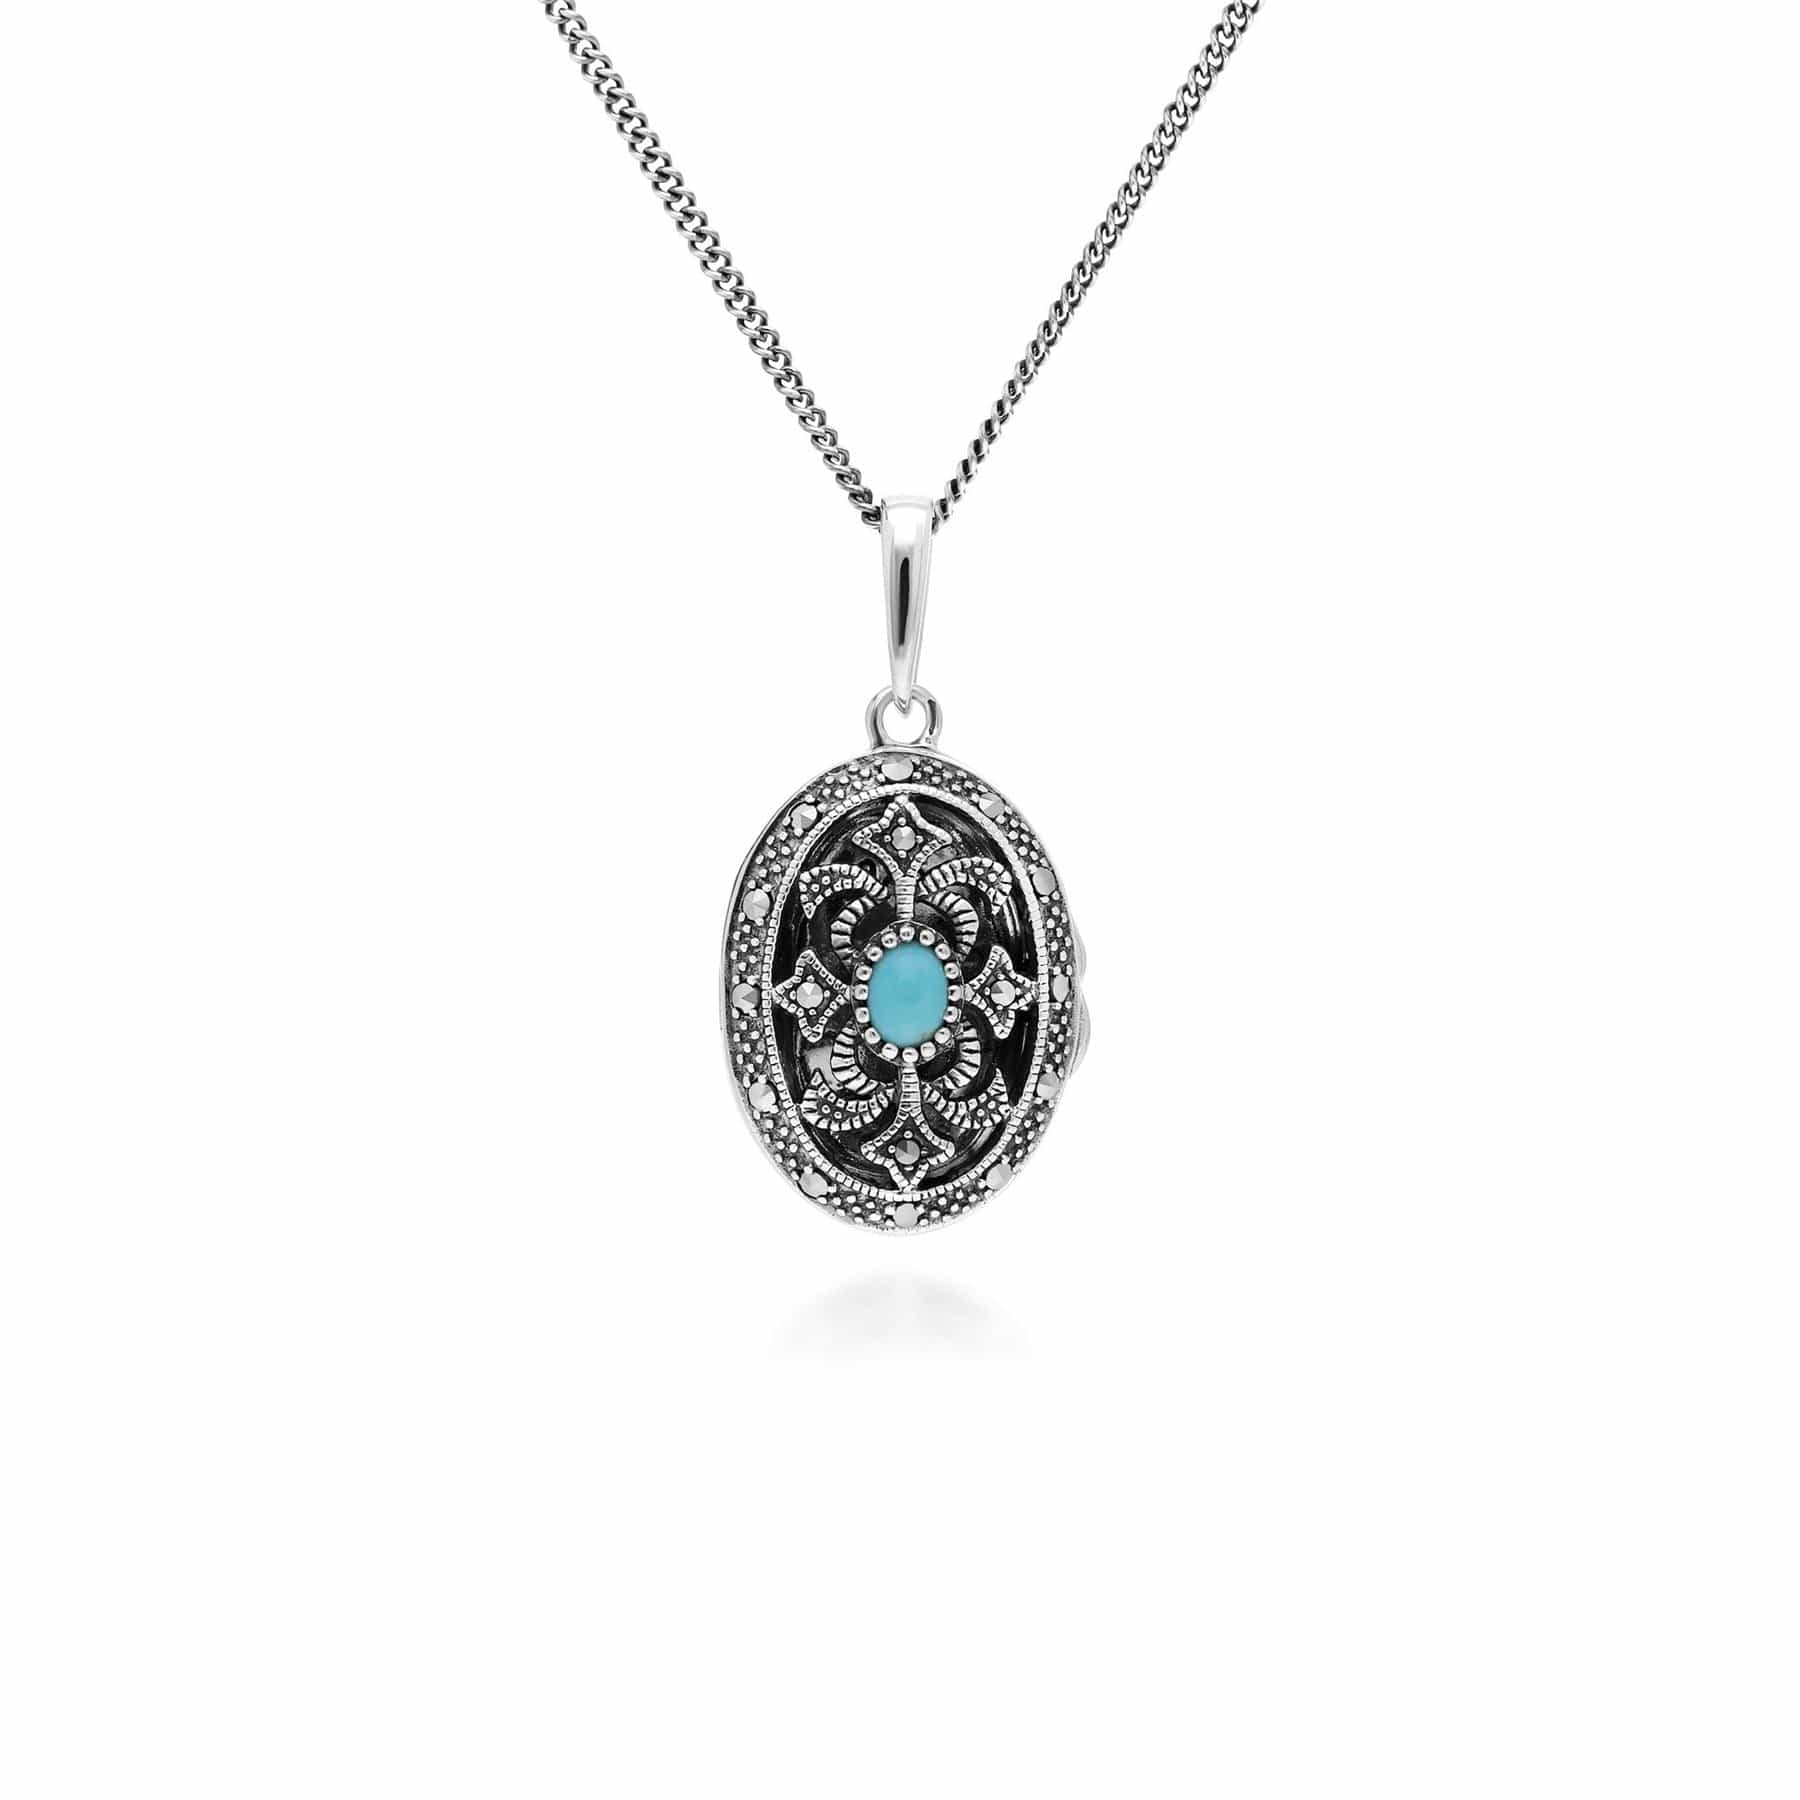 Image of Art Nouveau Style Oval Turquoise & Marcasite Locket Necklace in 925 Sterling Silver